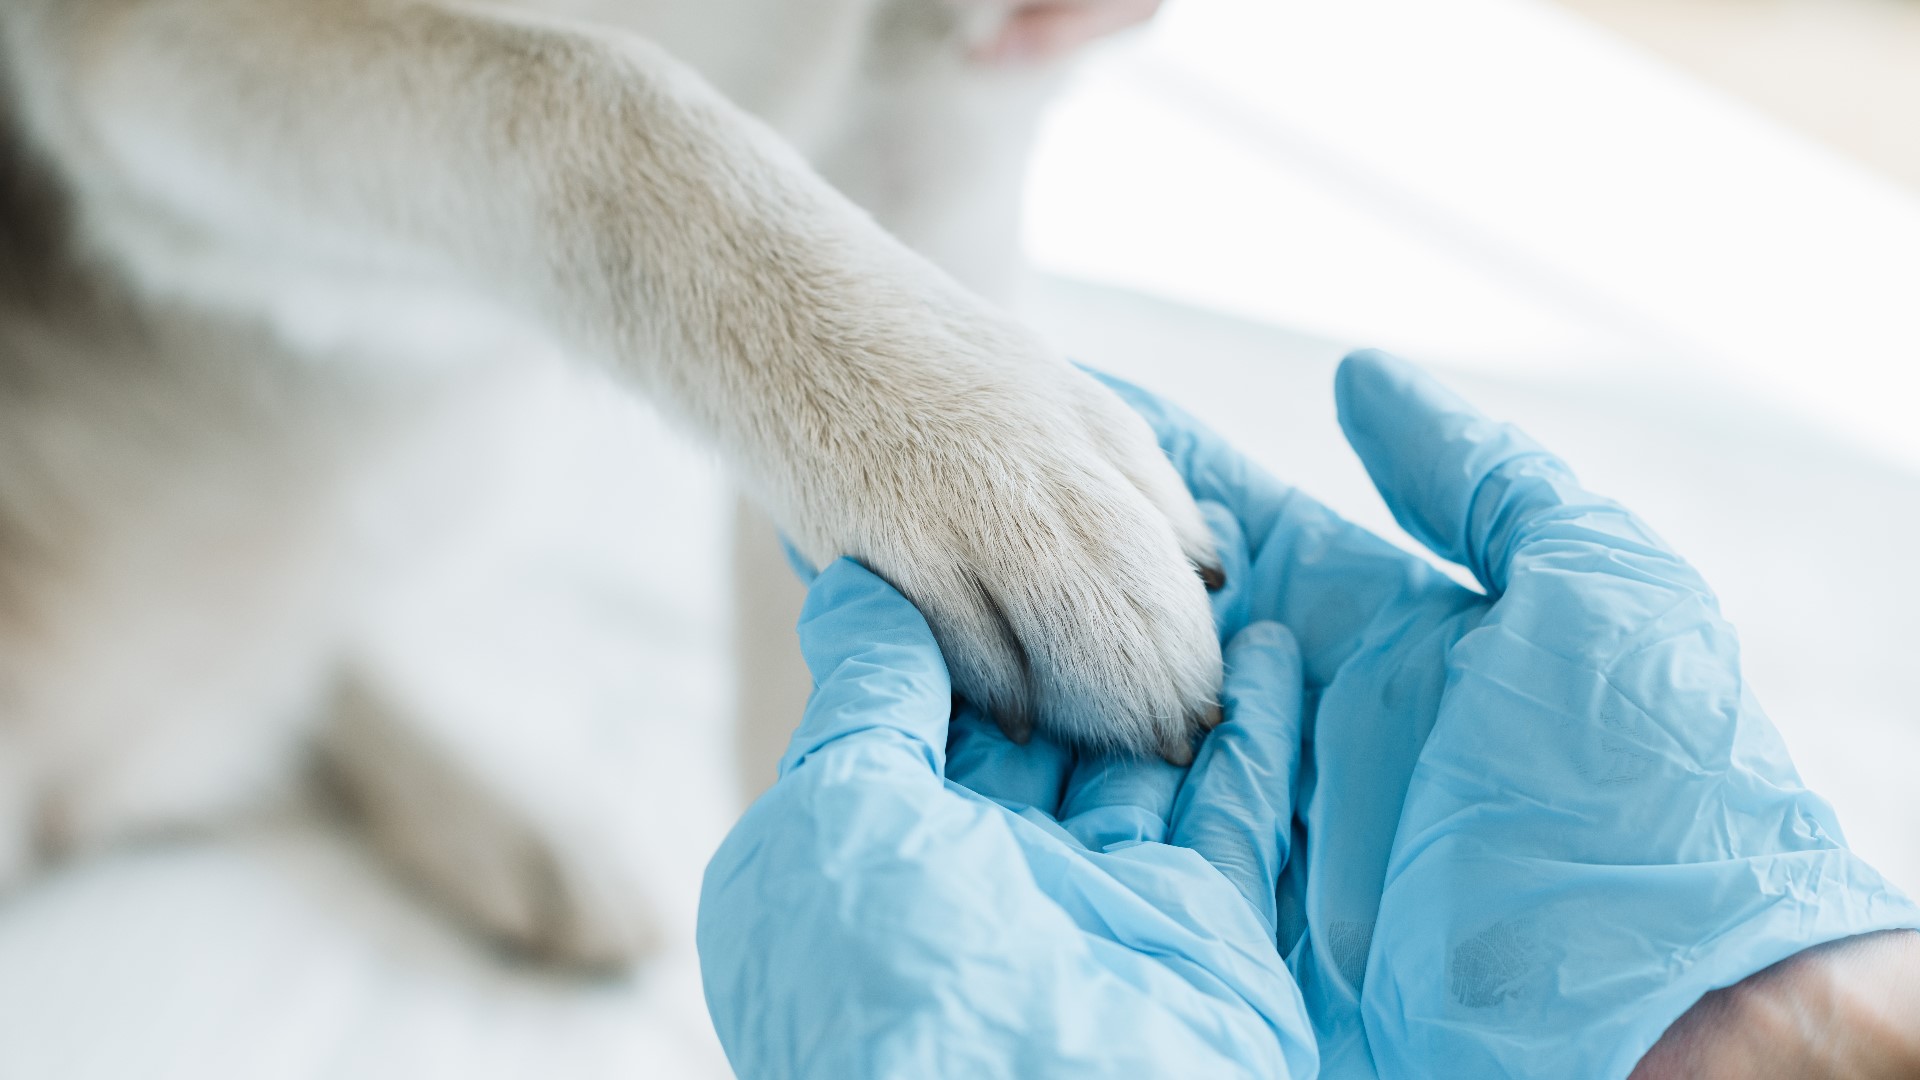 A dog in Tarrant County has been confirmed as infected with SARS-CoV-2 by the U.S. Department of Agriculture. State officials say the 2-year-old dog is healthy.